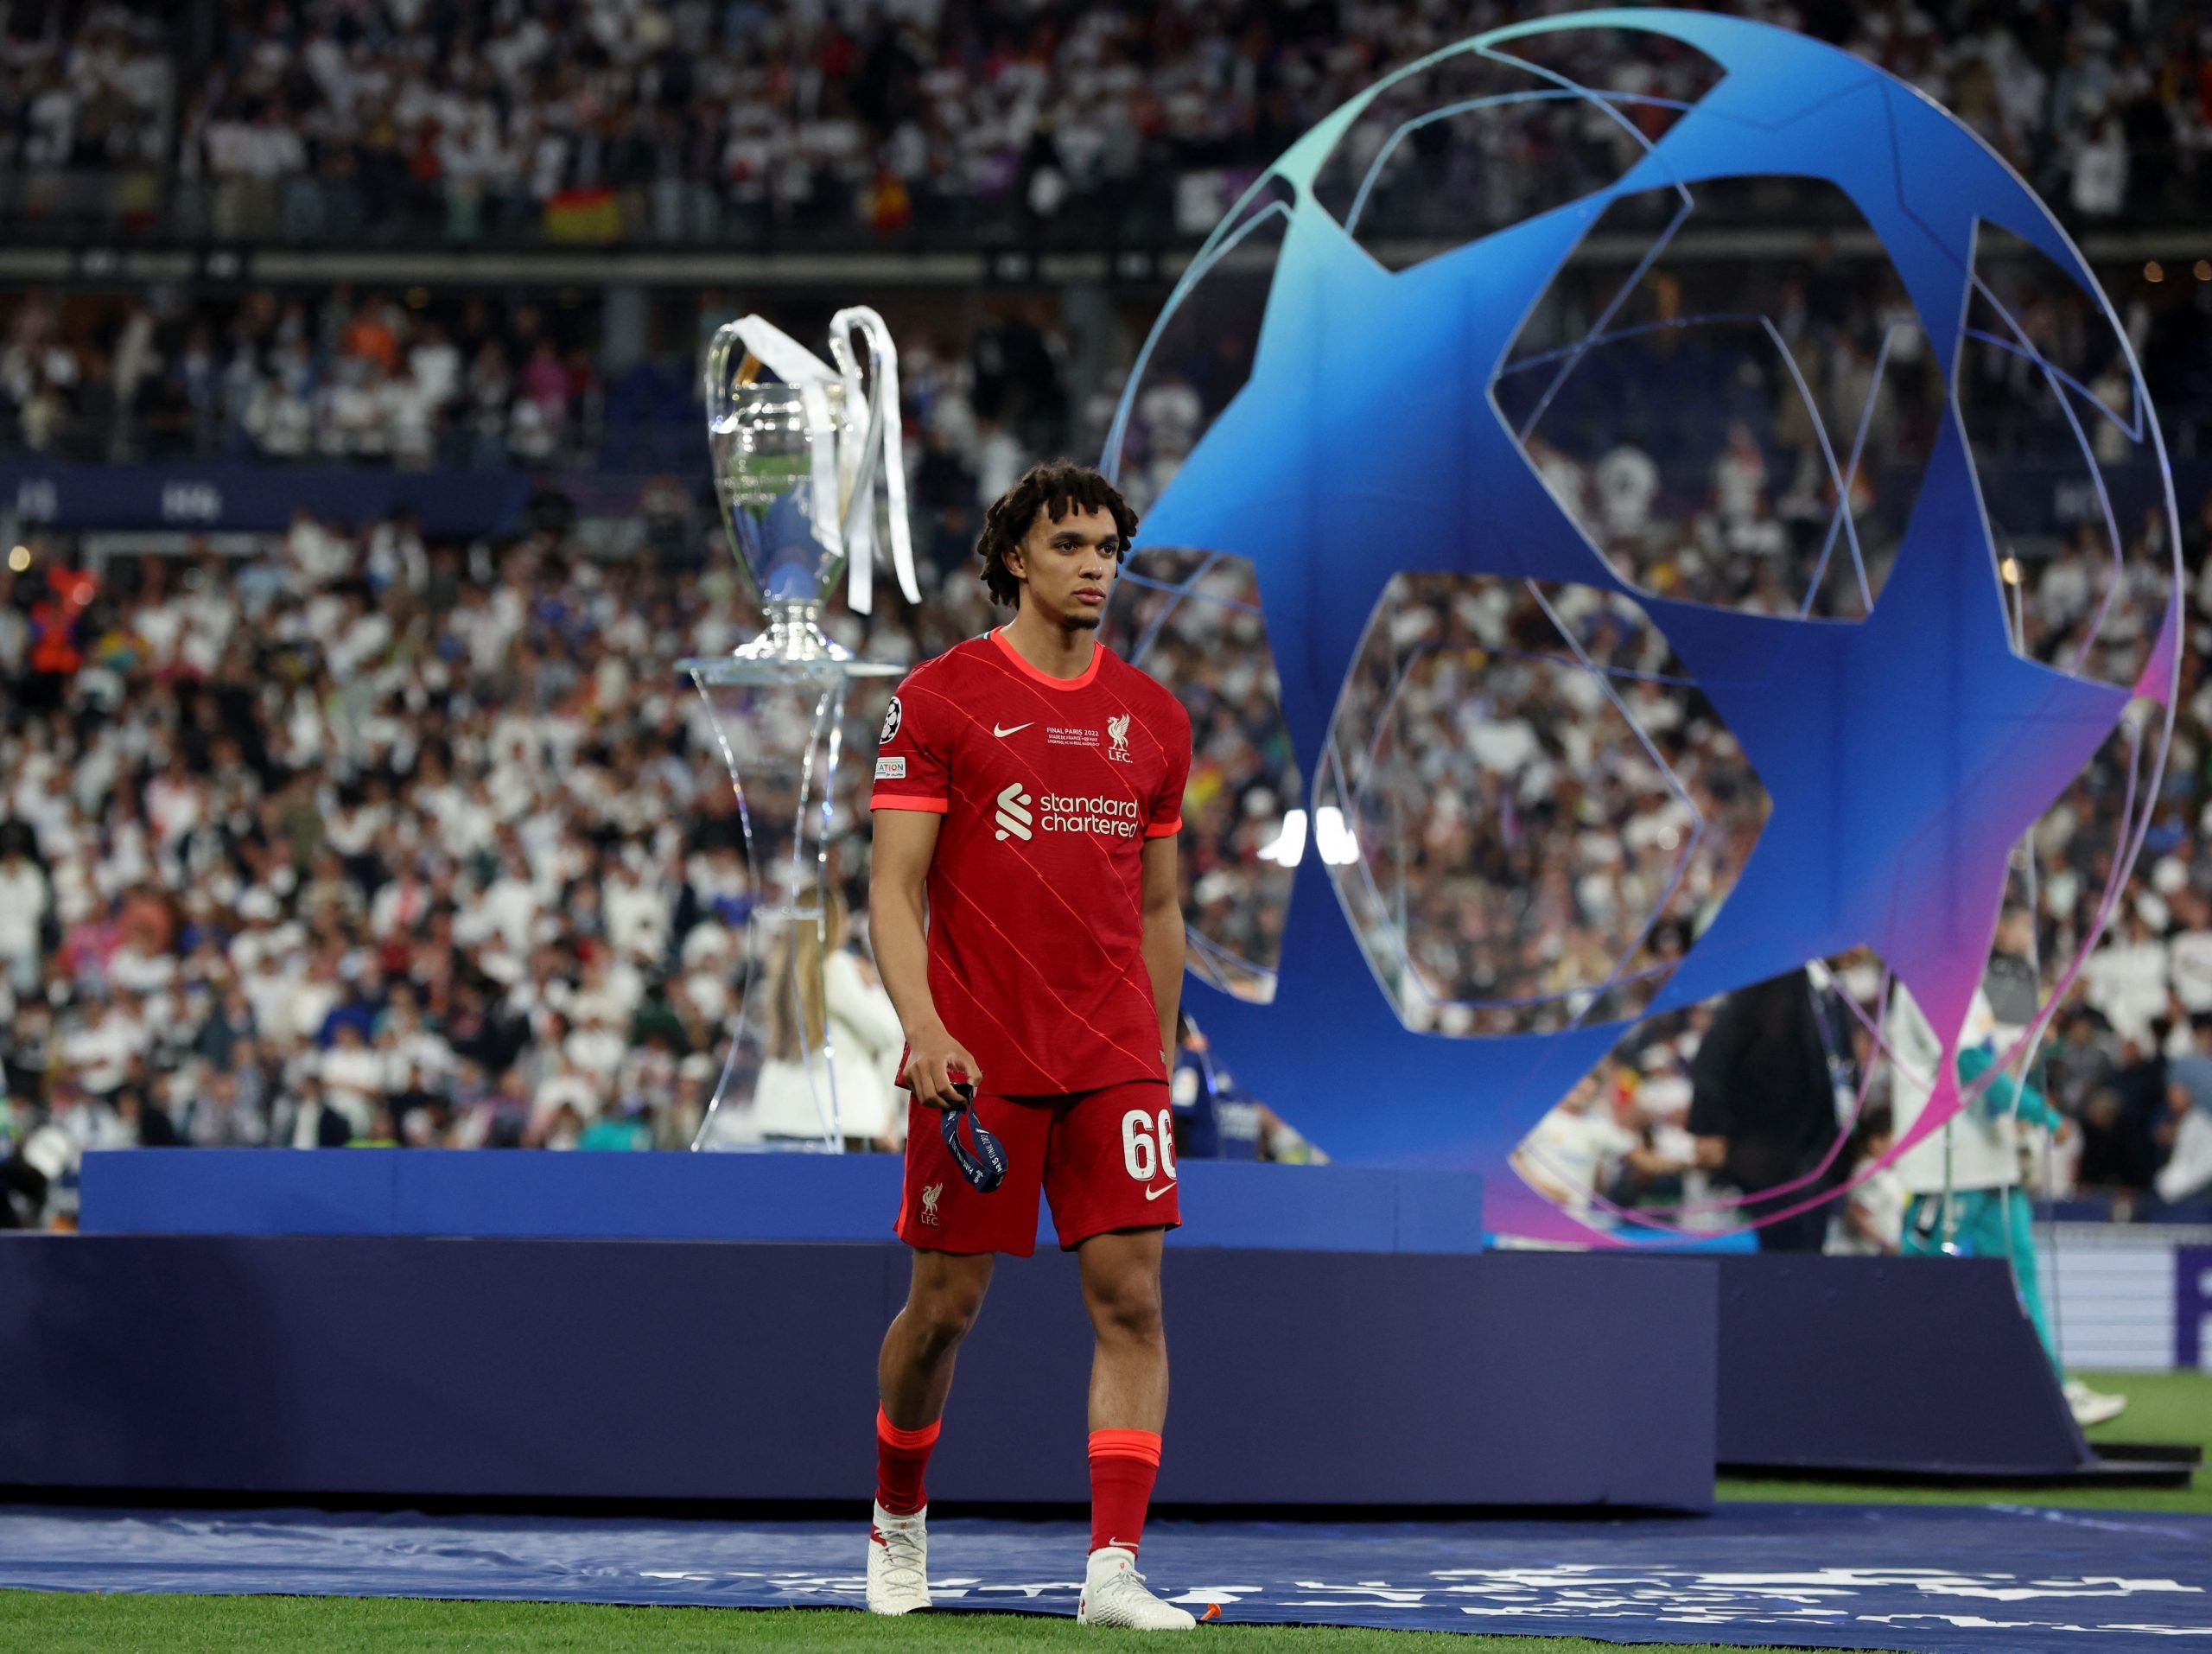 Soccer Football - Champions League Final - Liverpool v Real Madrid - Stade de France, Saint-Denis near Paris, France - May 28, 2022 Liverpool's Trent Alexander-Arnold looks dejected as he walks past the trophy and collects his runners up medal after the match REUTERS/Lee Smith